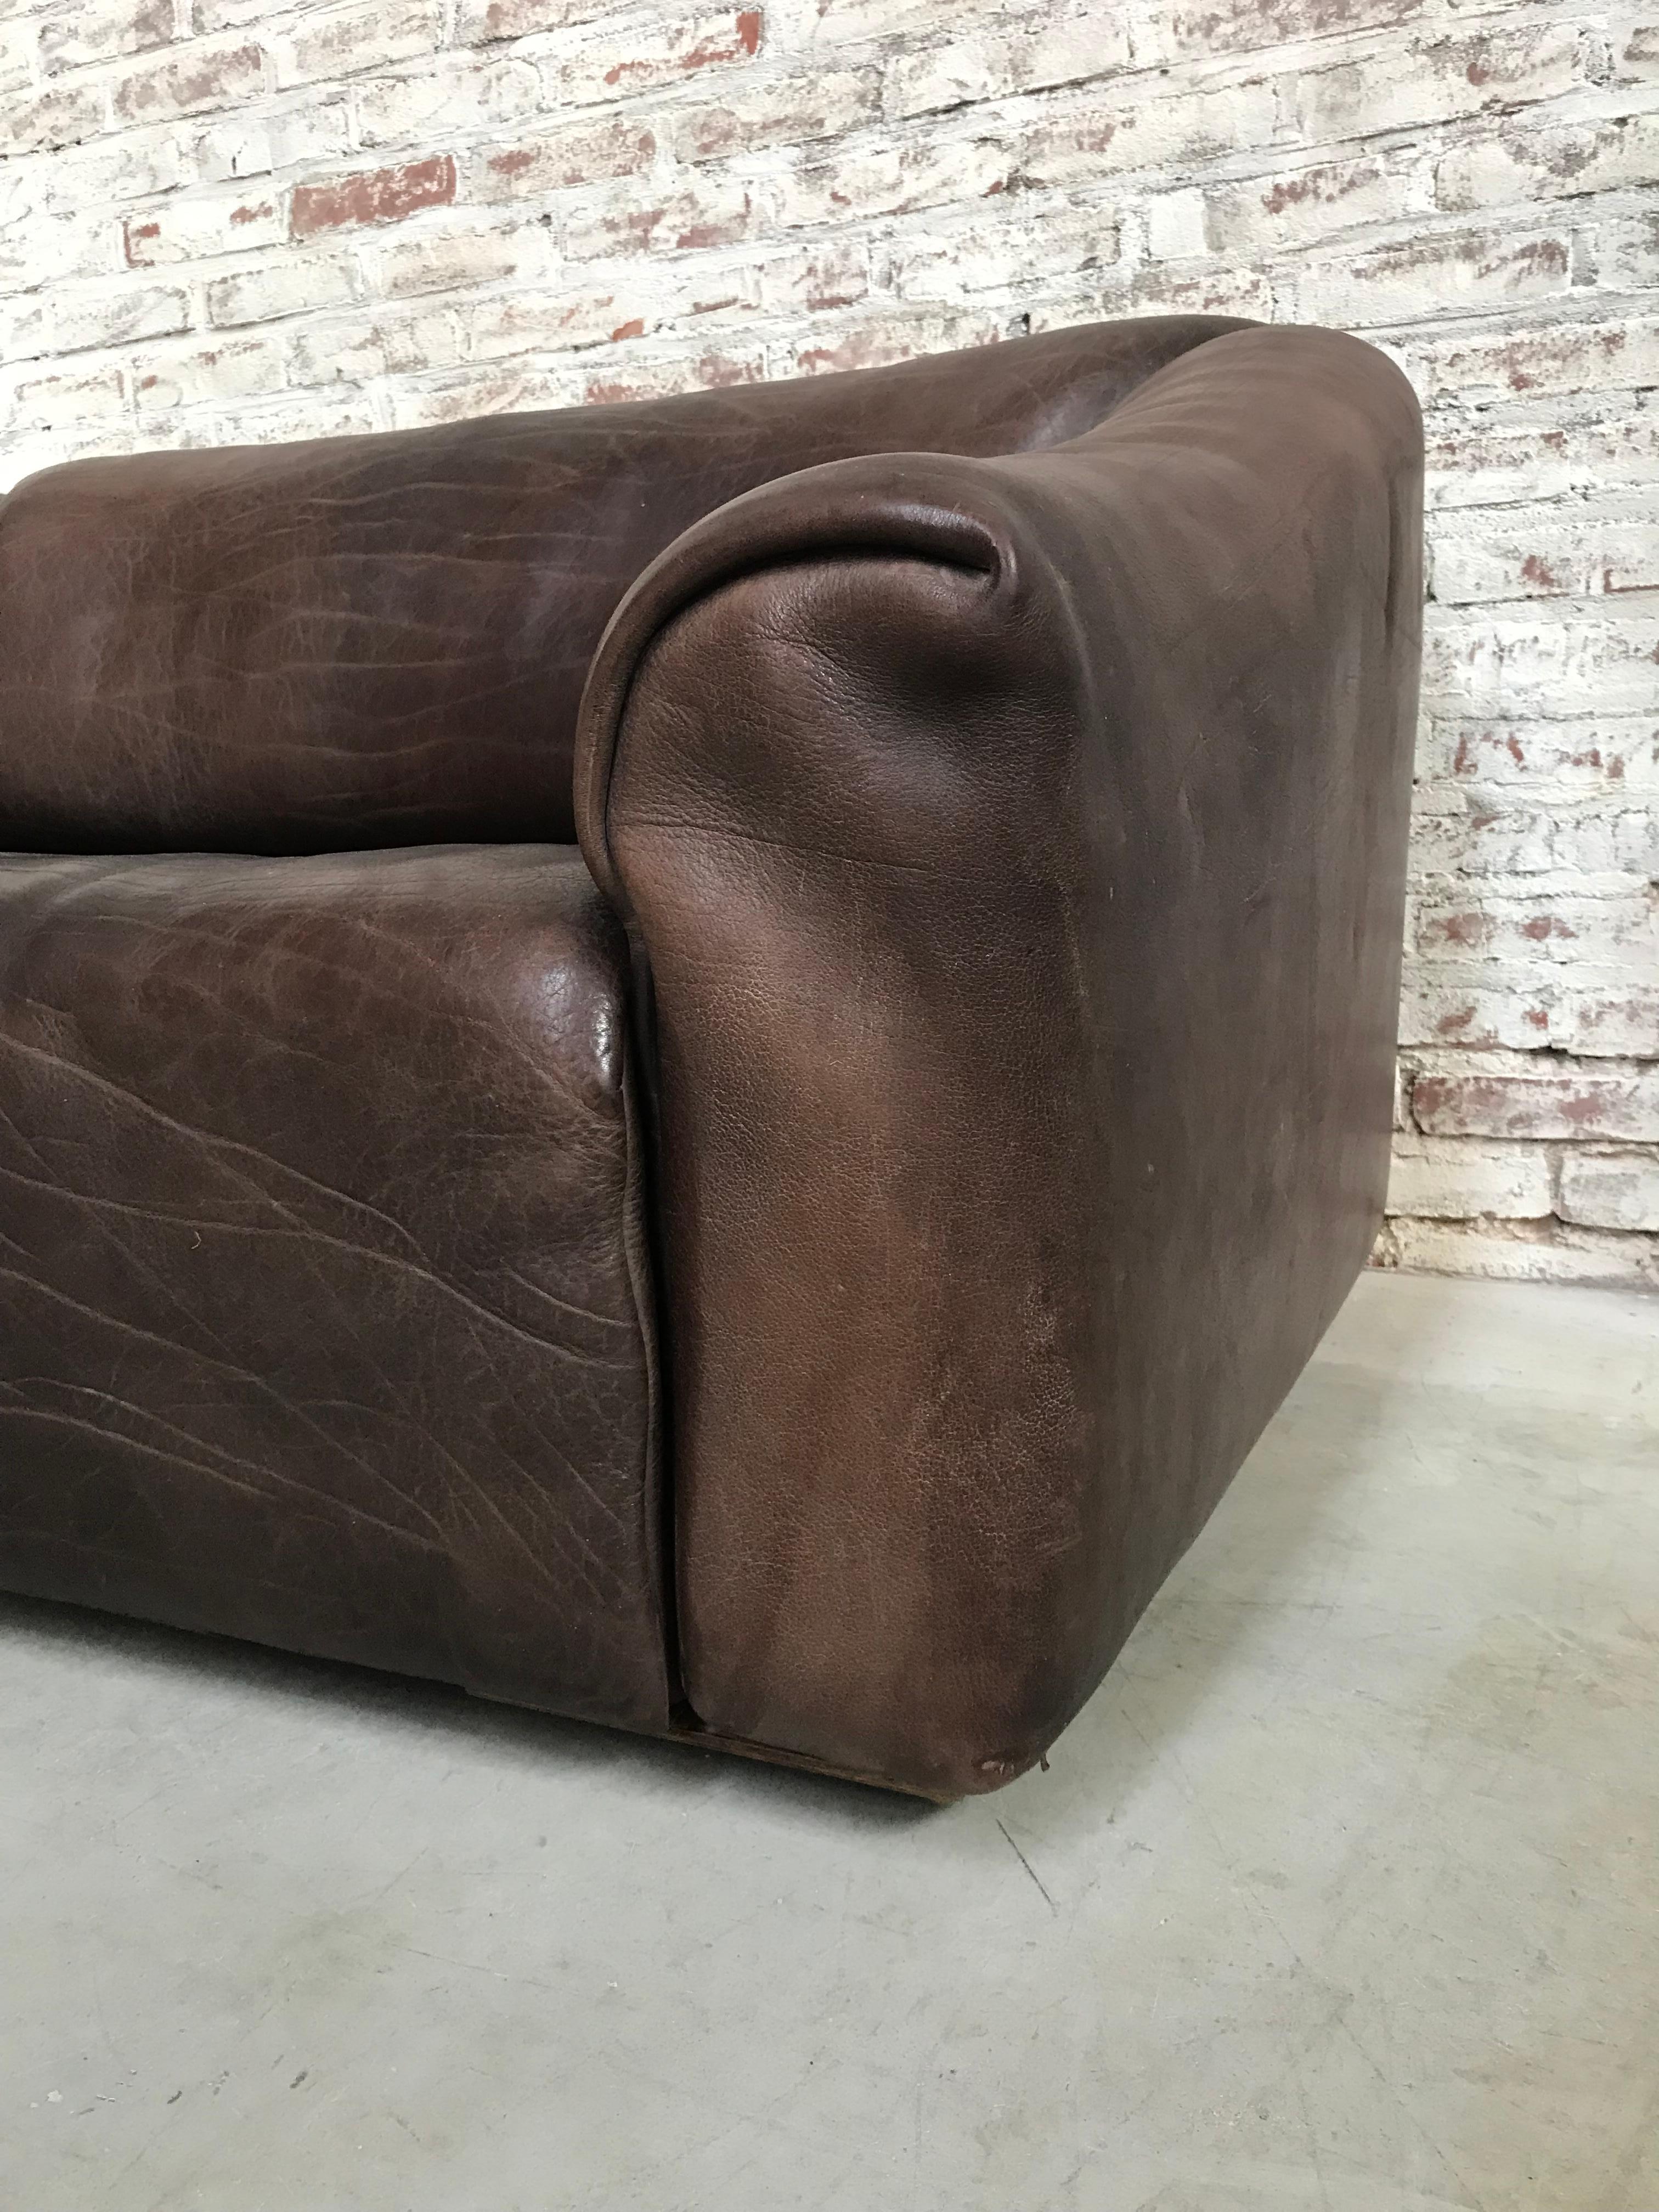 Midcentury Swiss De Sede Ds-47 Two-Seat in Chocolat Neck Leather, 1970s For Sale 6